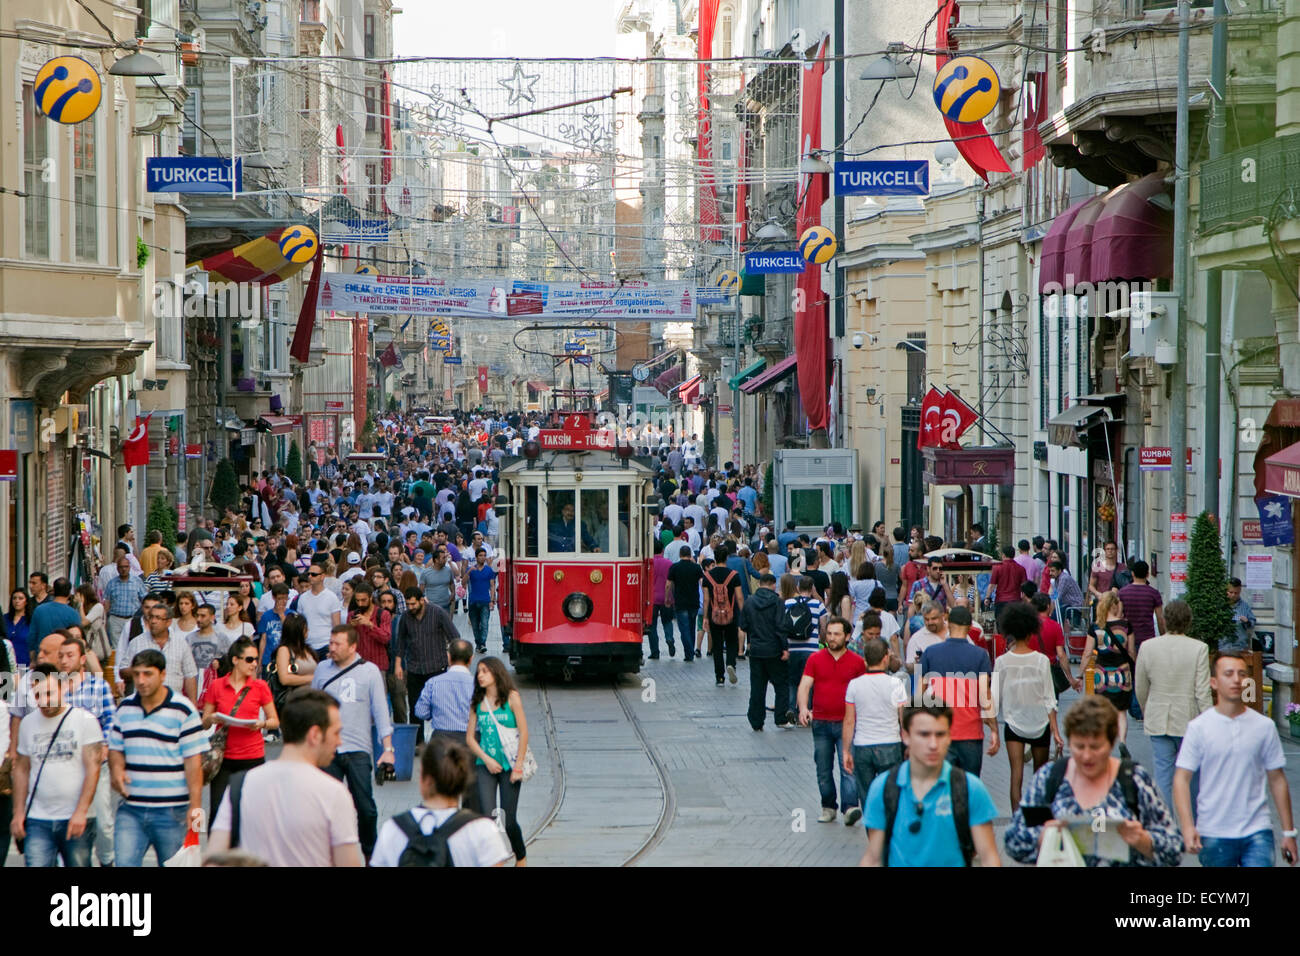 Historic tram in Istiklal Avenue, busy shopping street near Taksim square in the city Istanbul, Turkey Stock Photo